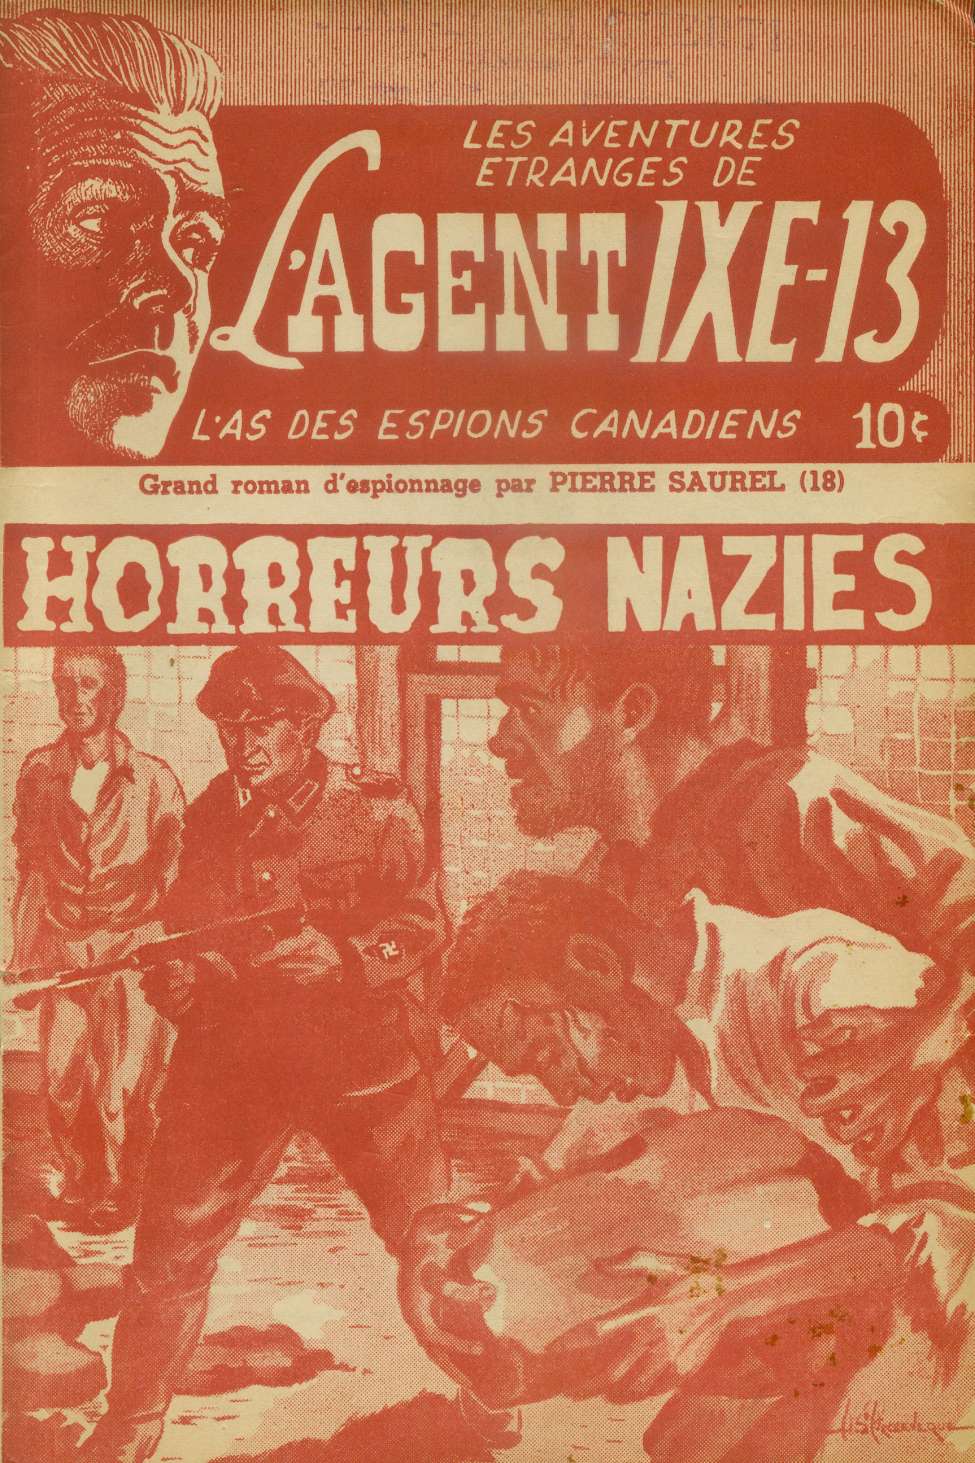 Book Cover For L'Agent IXE-13 v2 18 - Horreurs nazies